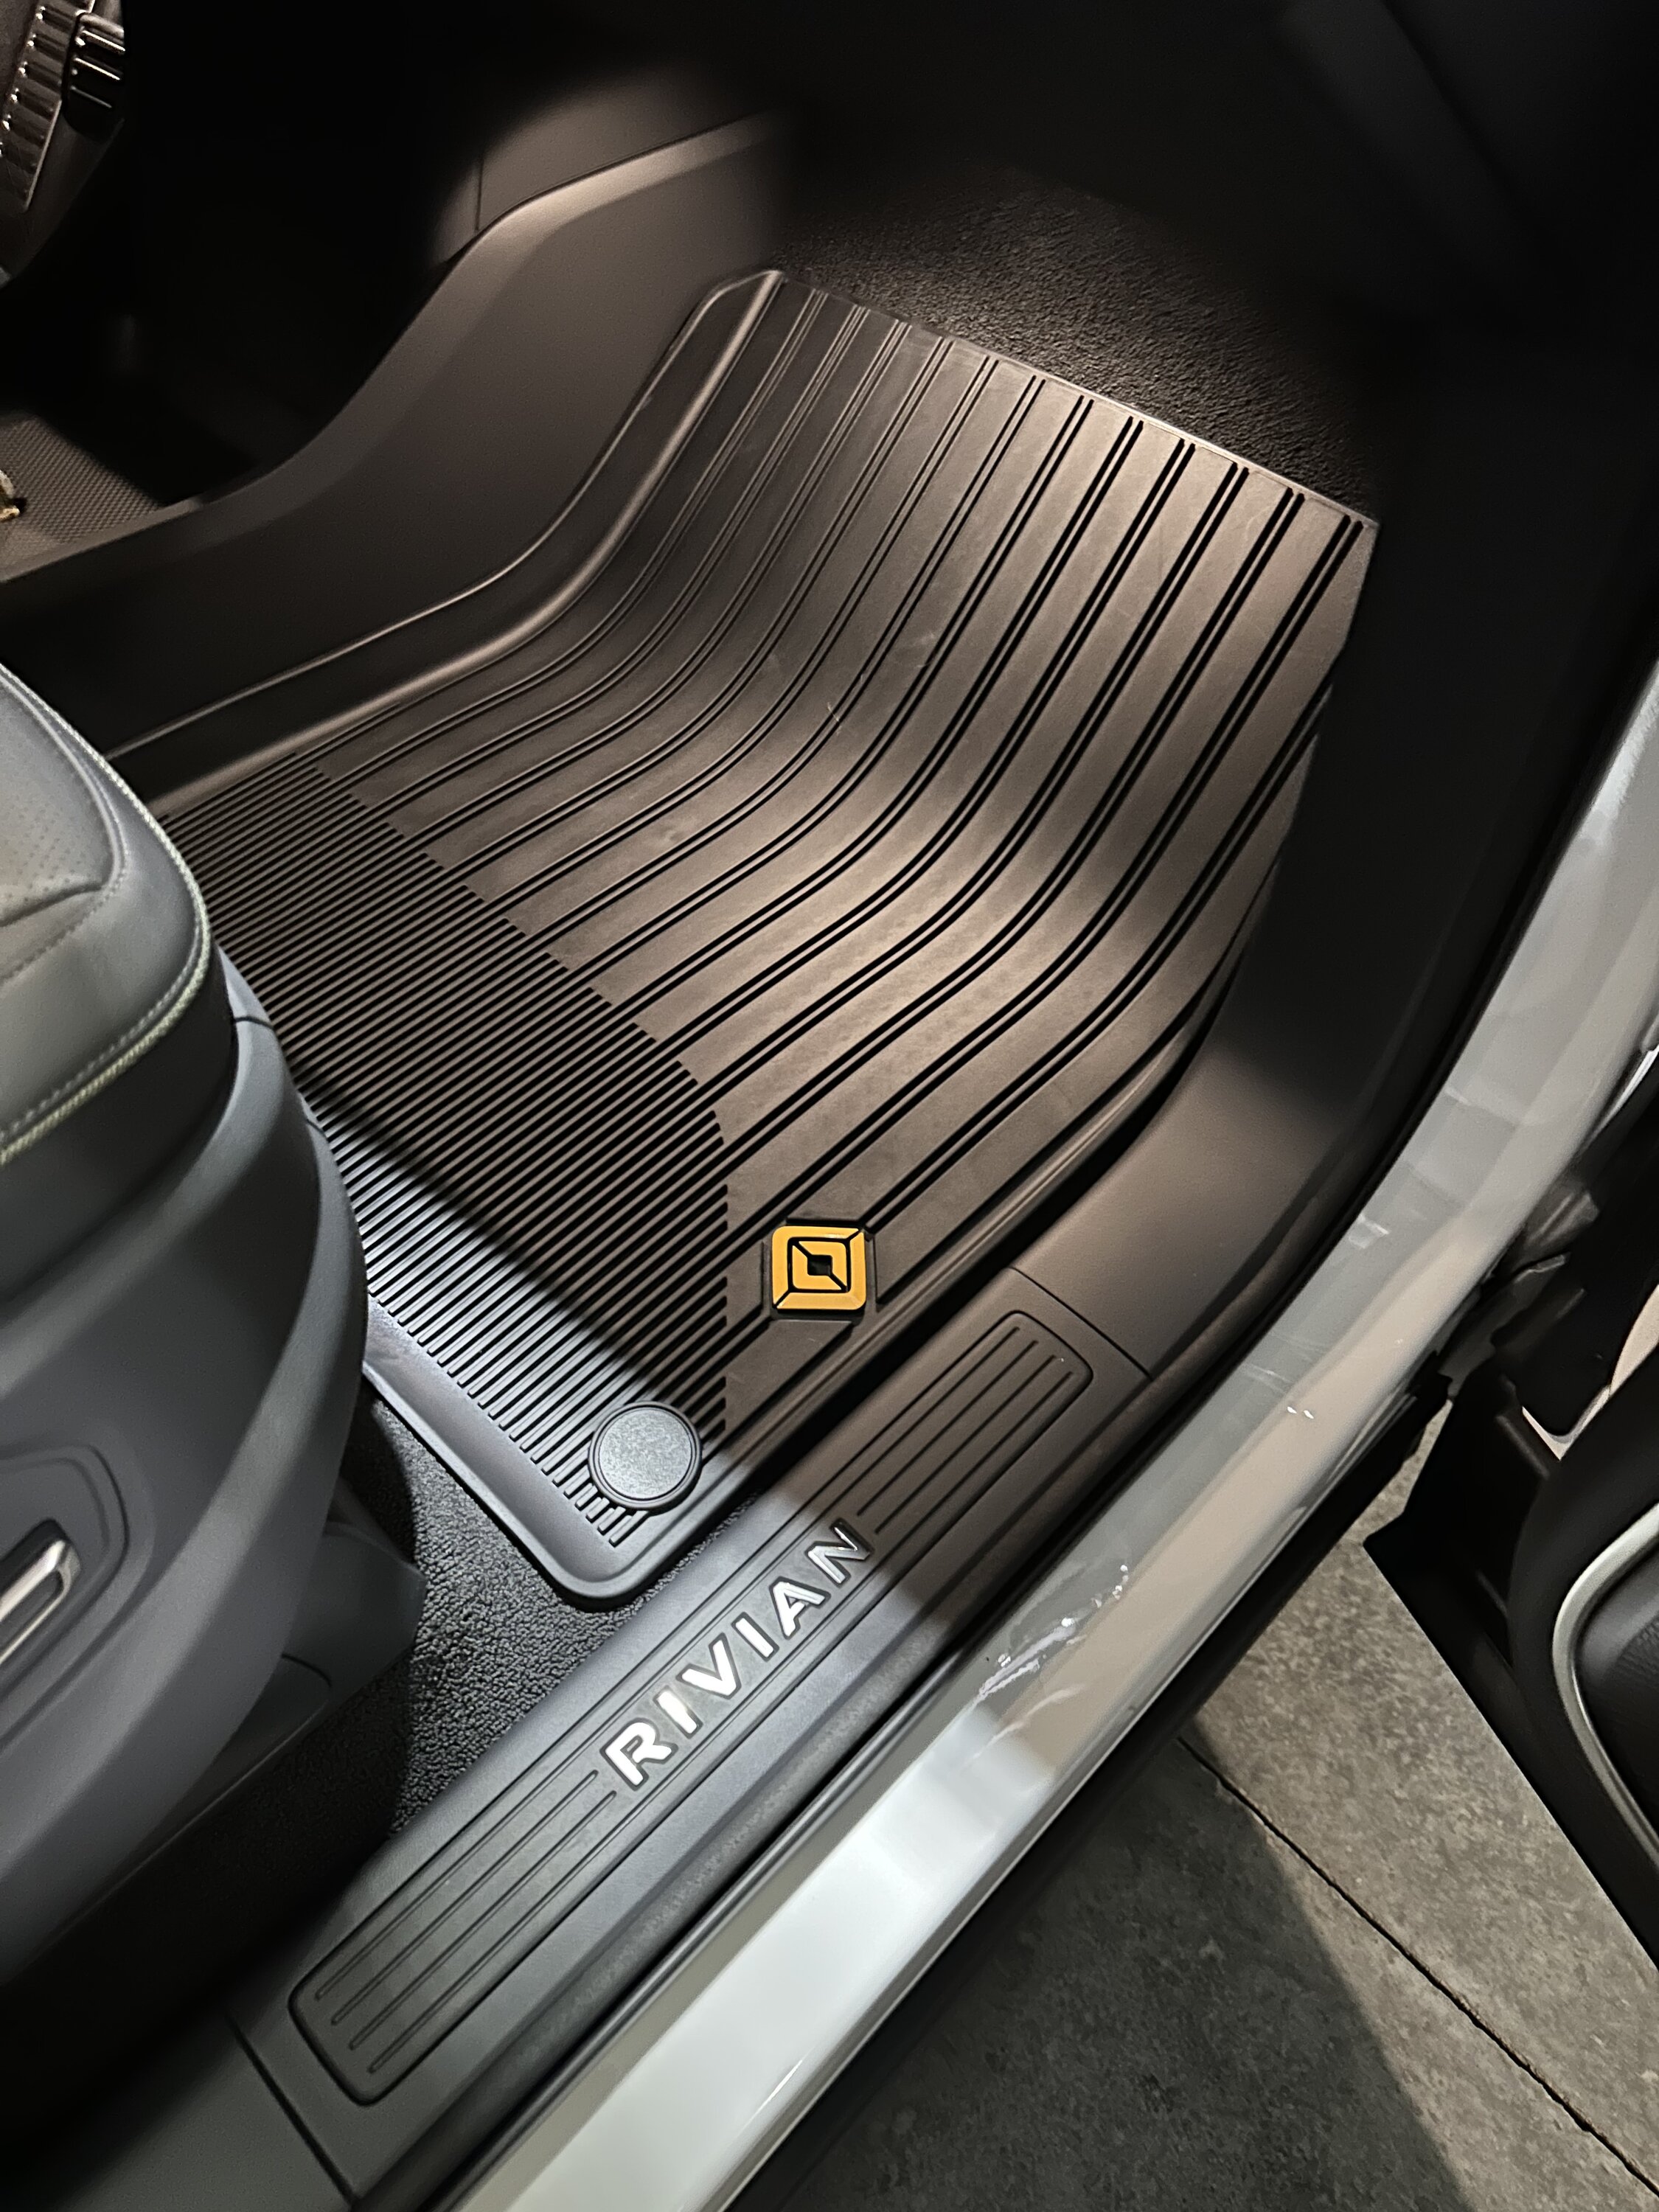 Rivian R1T R1S All weather floor mats logos are black A0D34184-C4F3-4D1C-BF71-73DC2A28E654